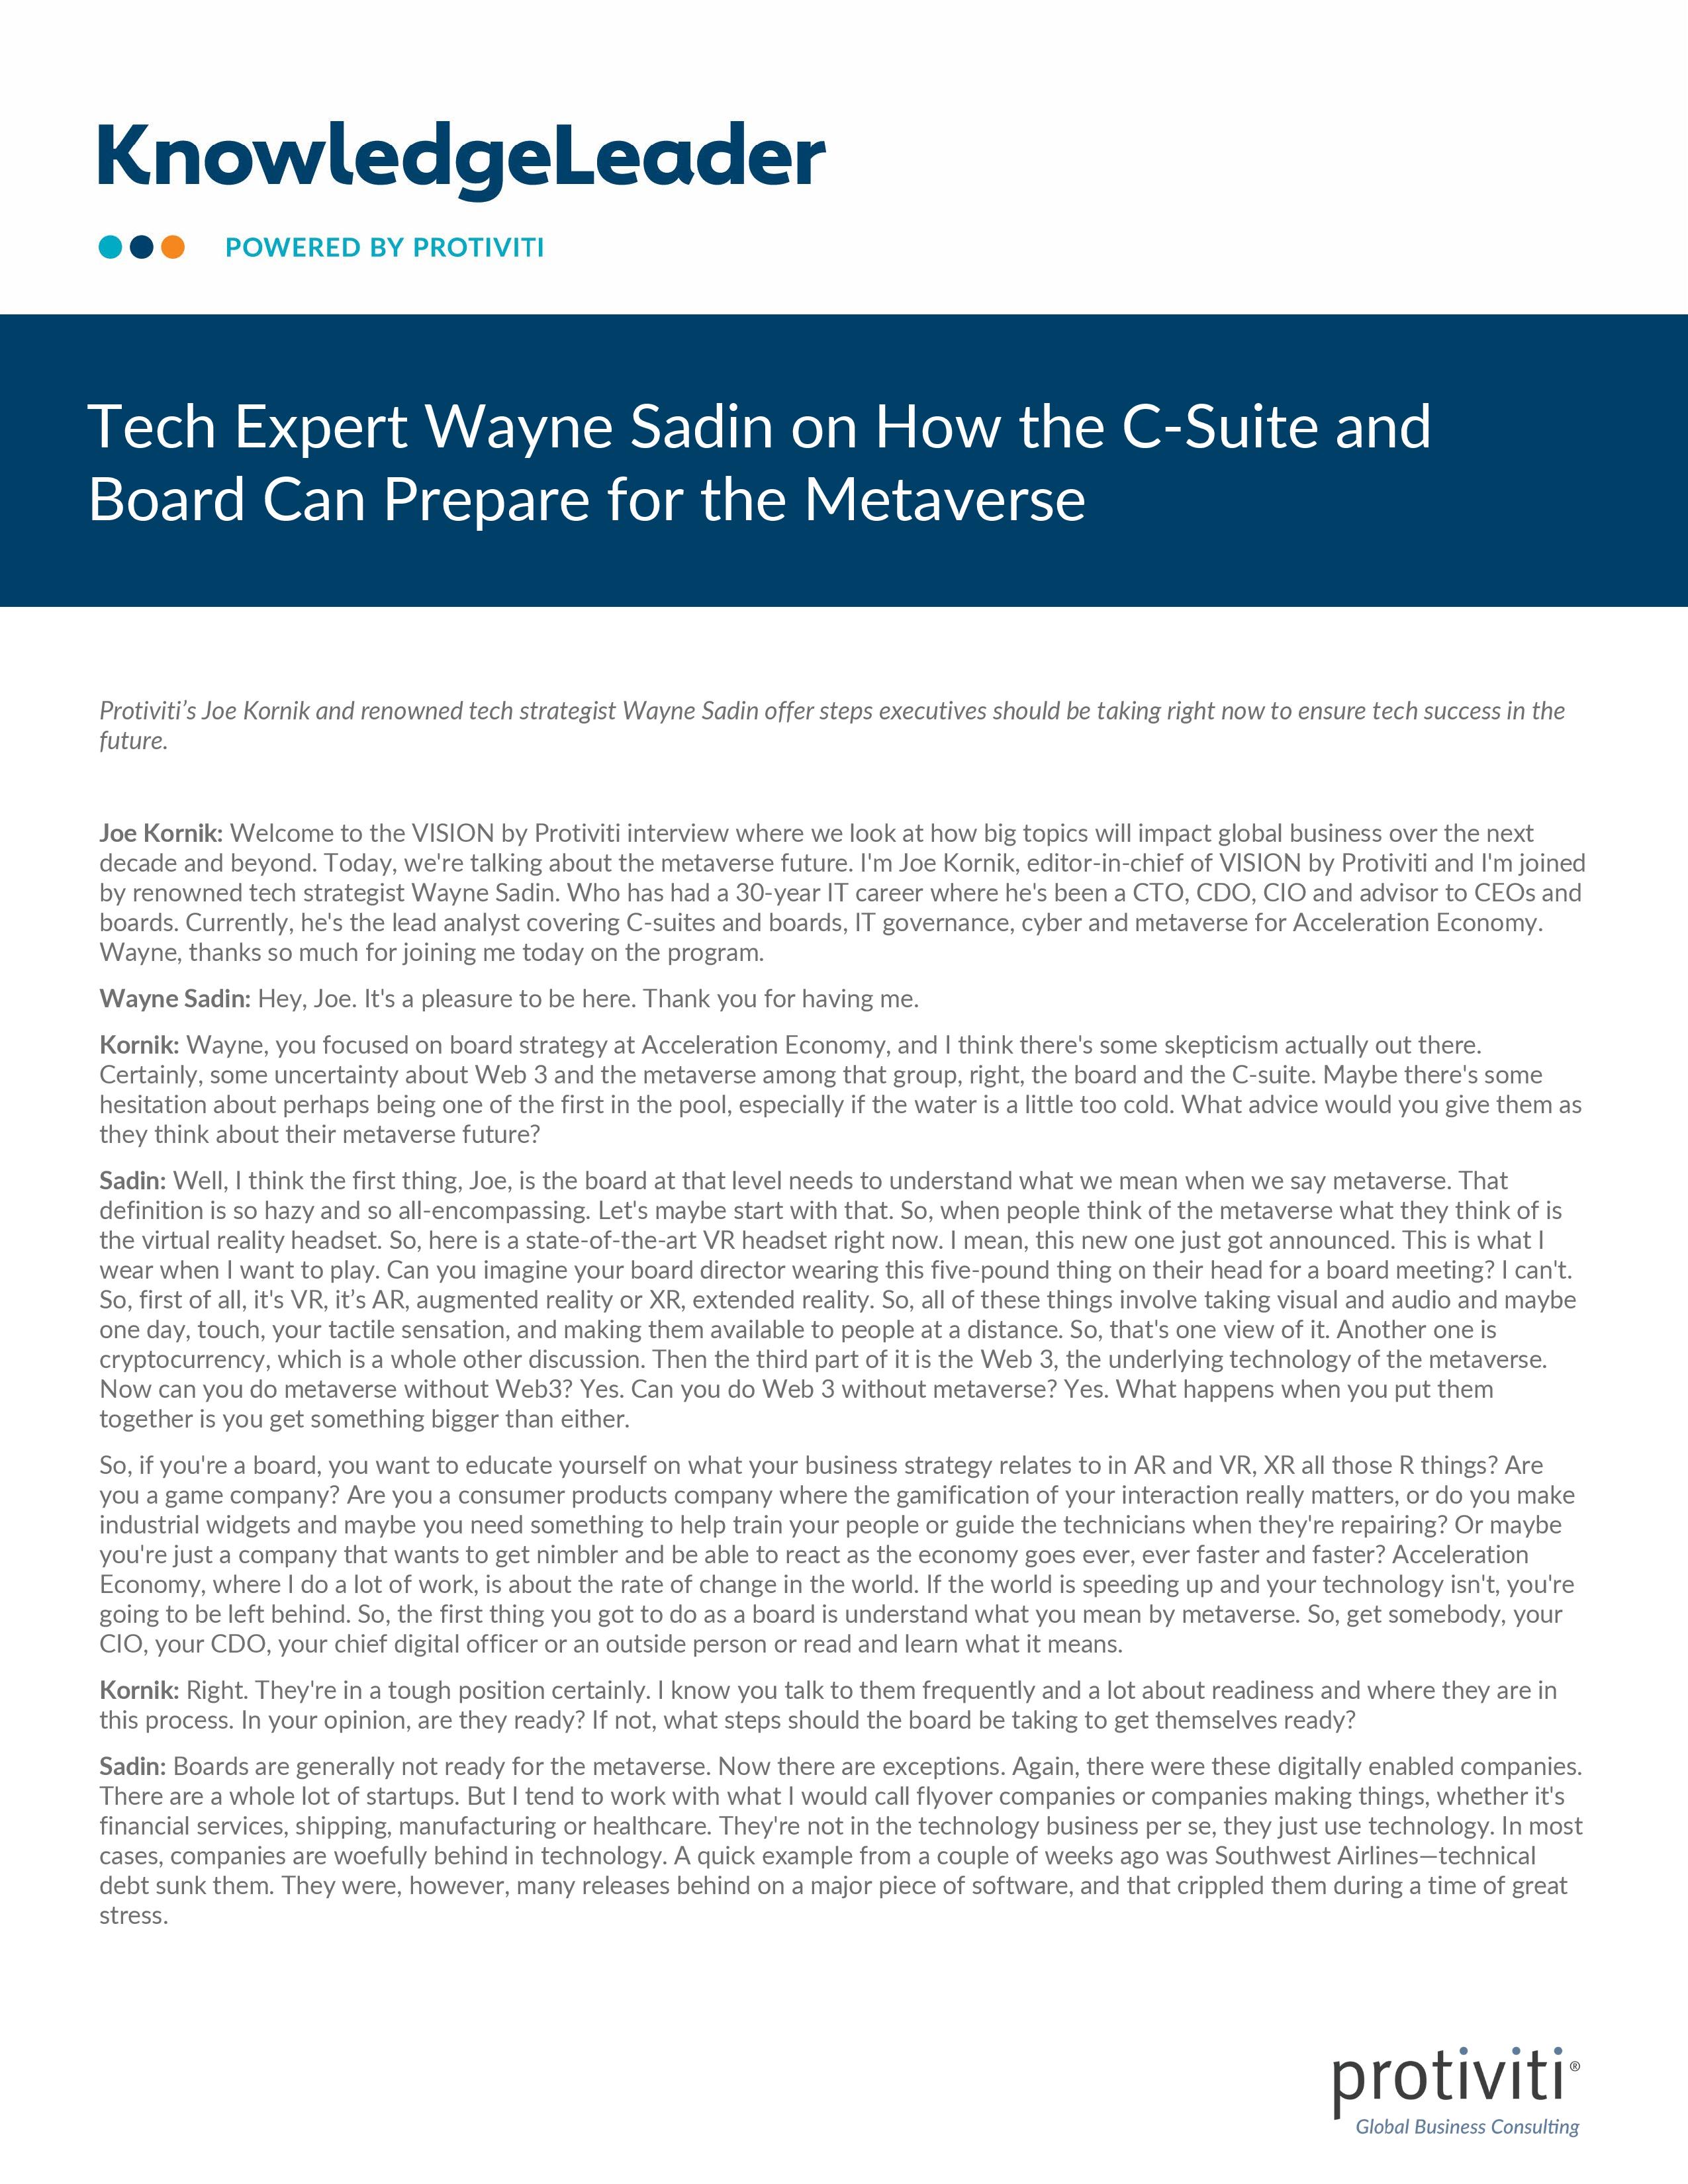 screenshot of the first page of Tech Expert Wayne Sadin on How the C-suite and Board Can Prepare for the Metaverse